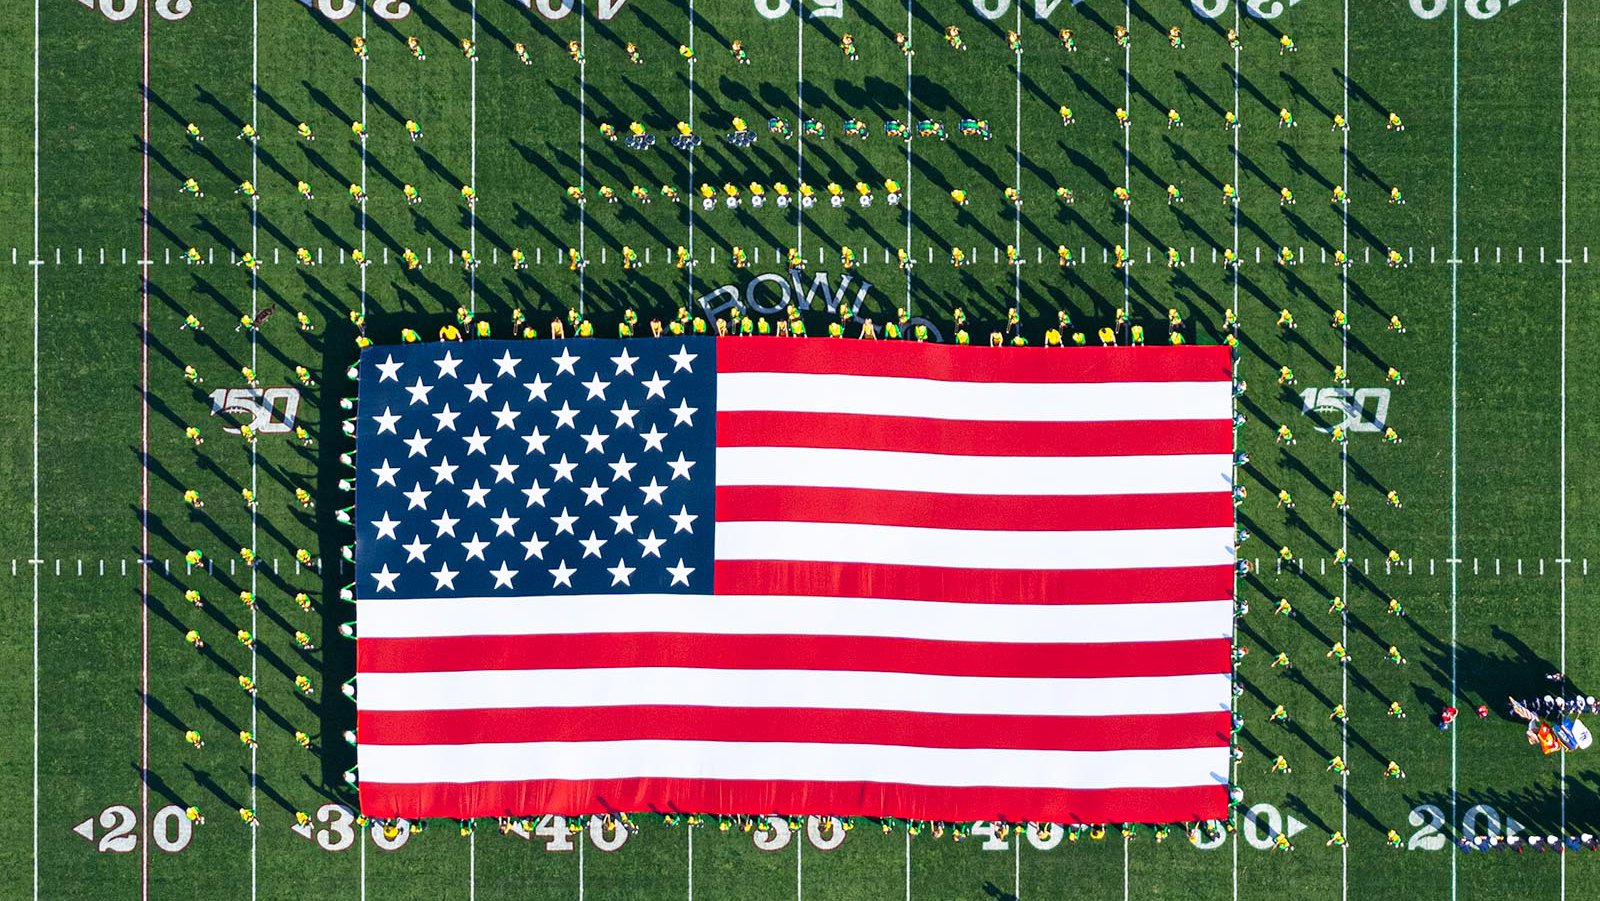 Blog image of the Oregon Marching Band (OMB) holding an American Flag on the field of the 106th Rose Bowl Game